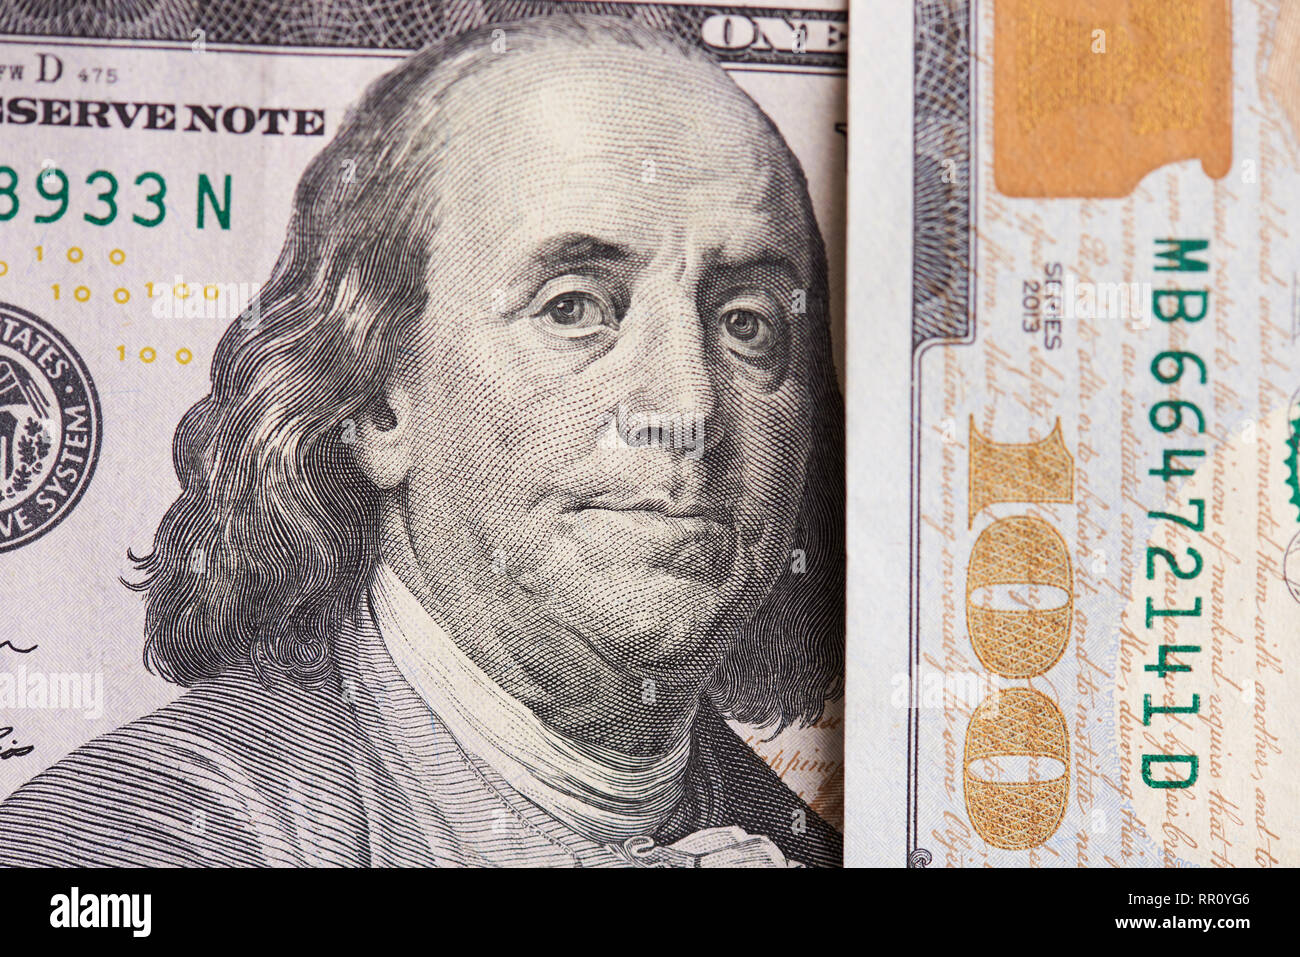 Franklin photo on 100 dollar bill close up view Stock Photo